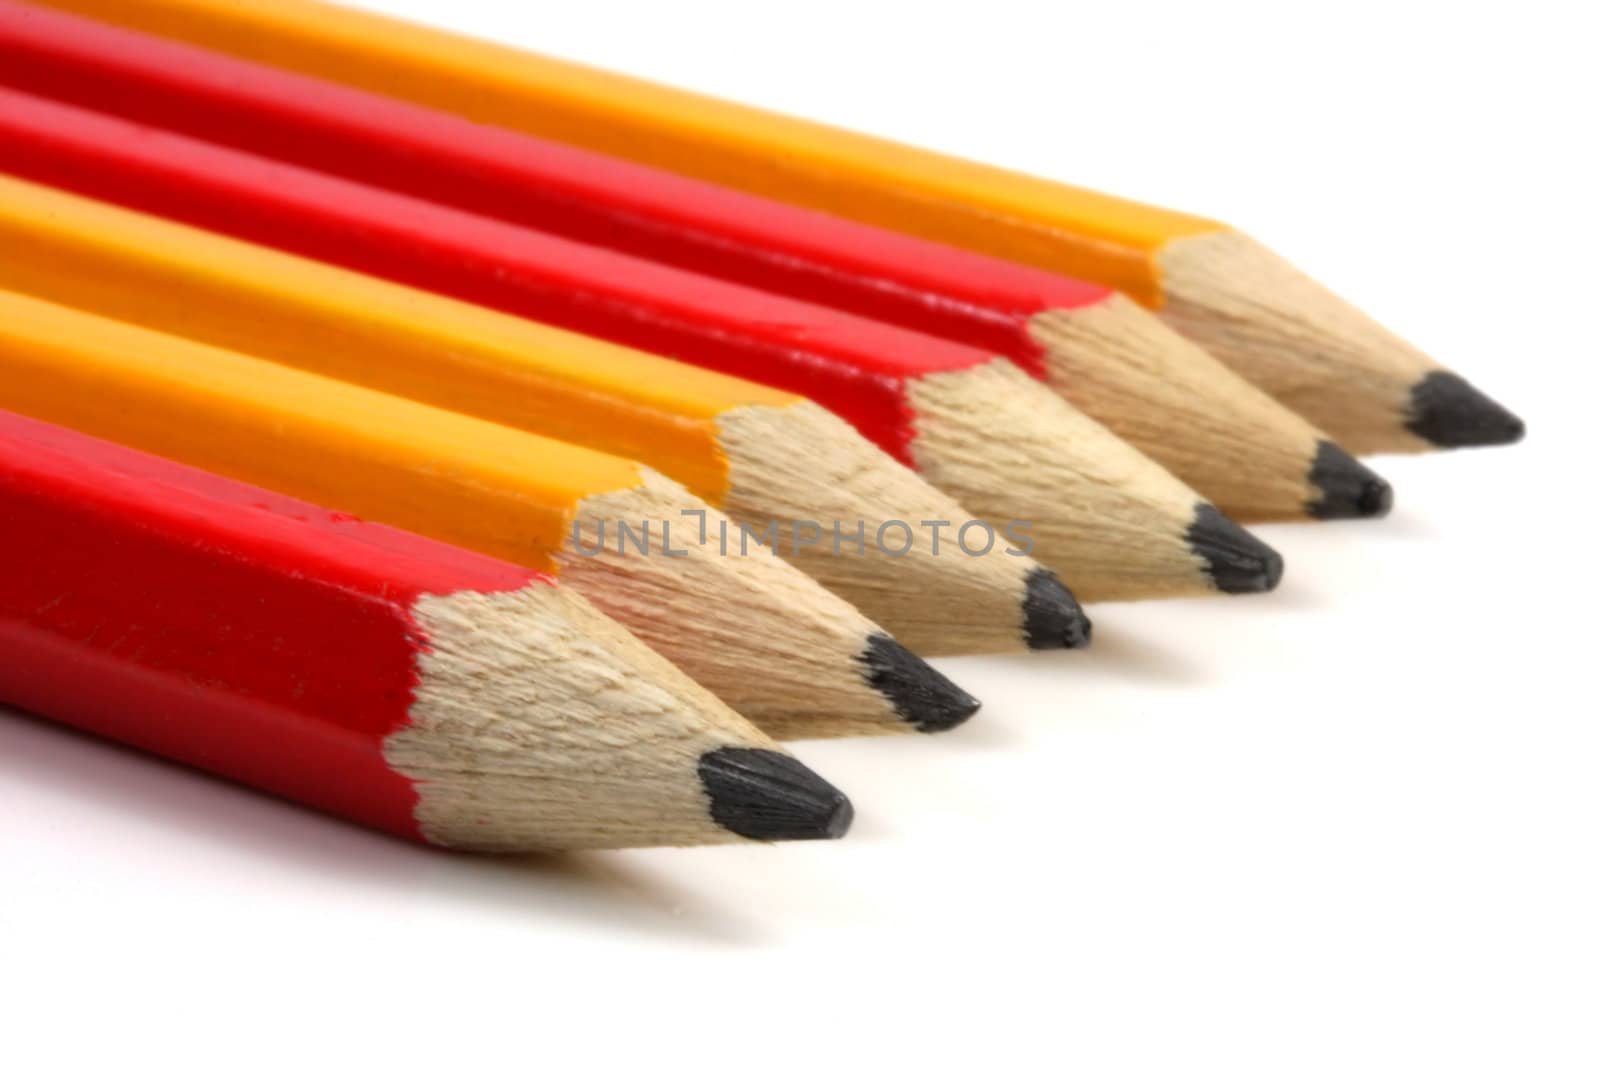 Pencils Back to School by TVR